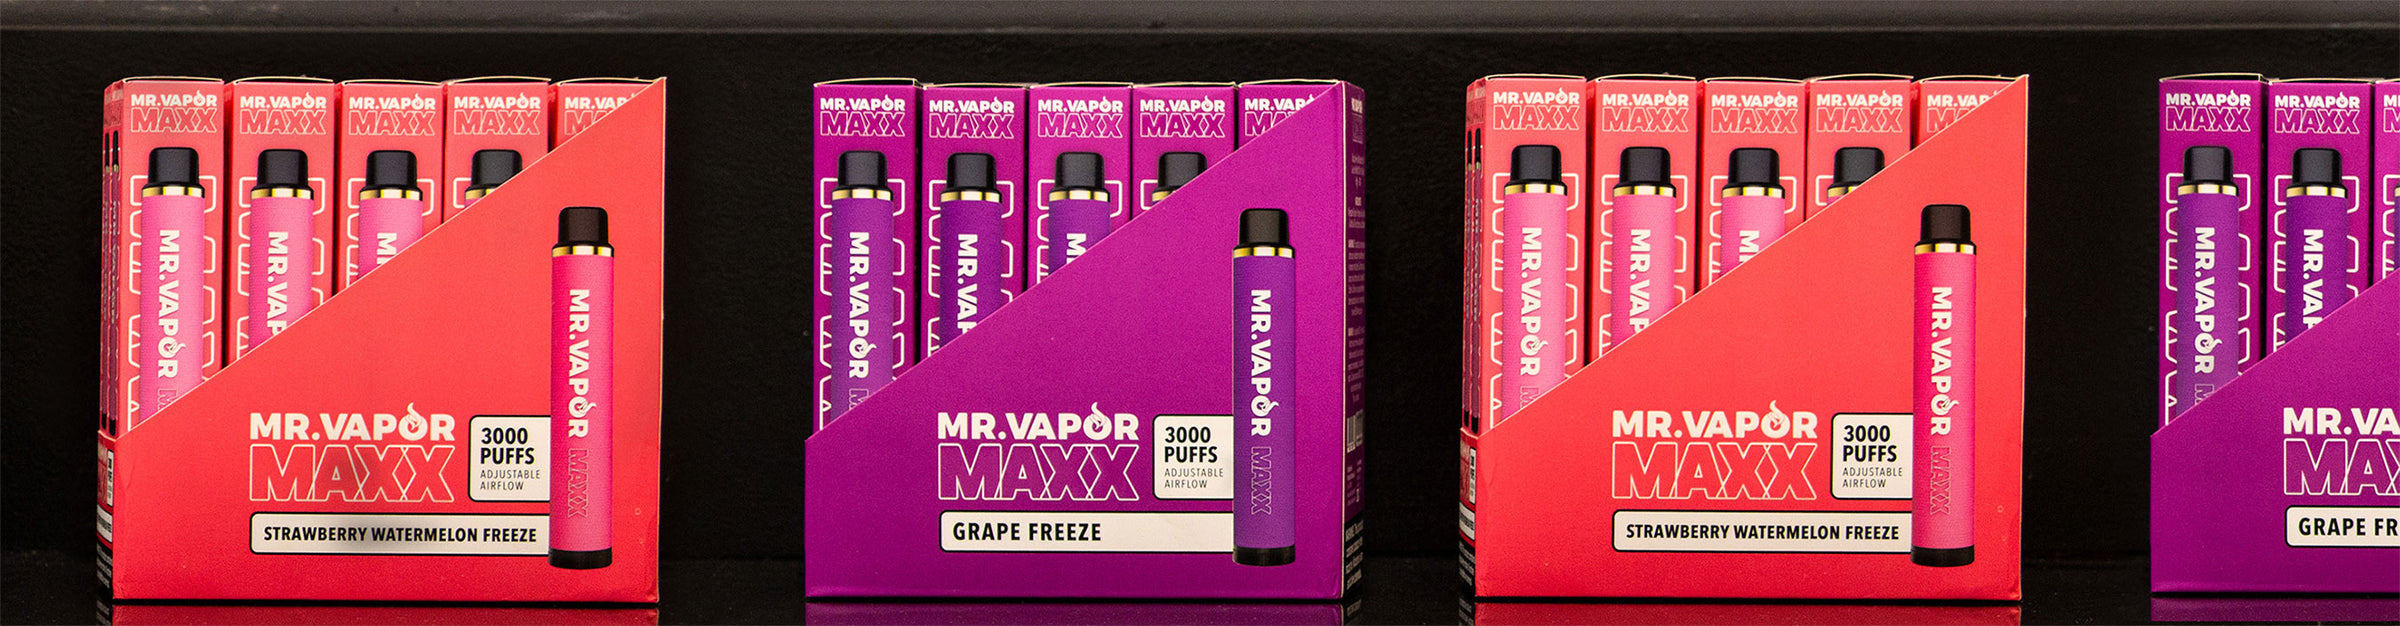 Wholesale Mr. Vapor disposable packs in a row on a black background